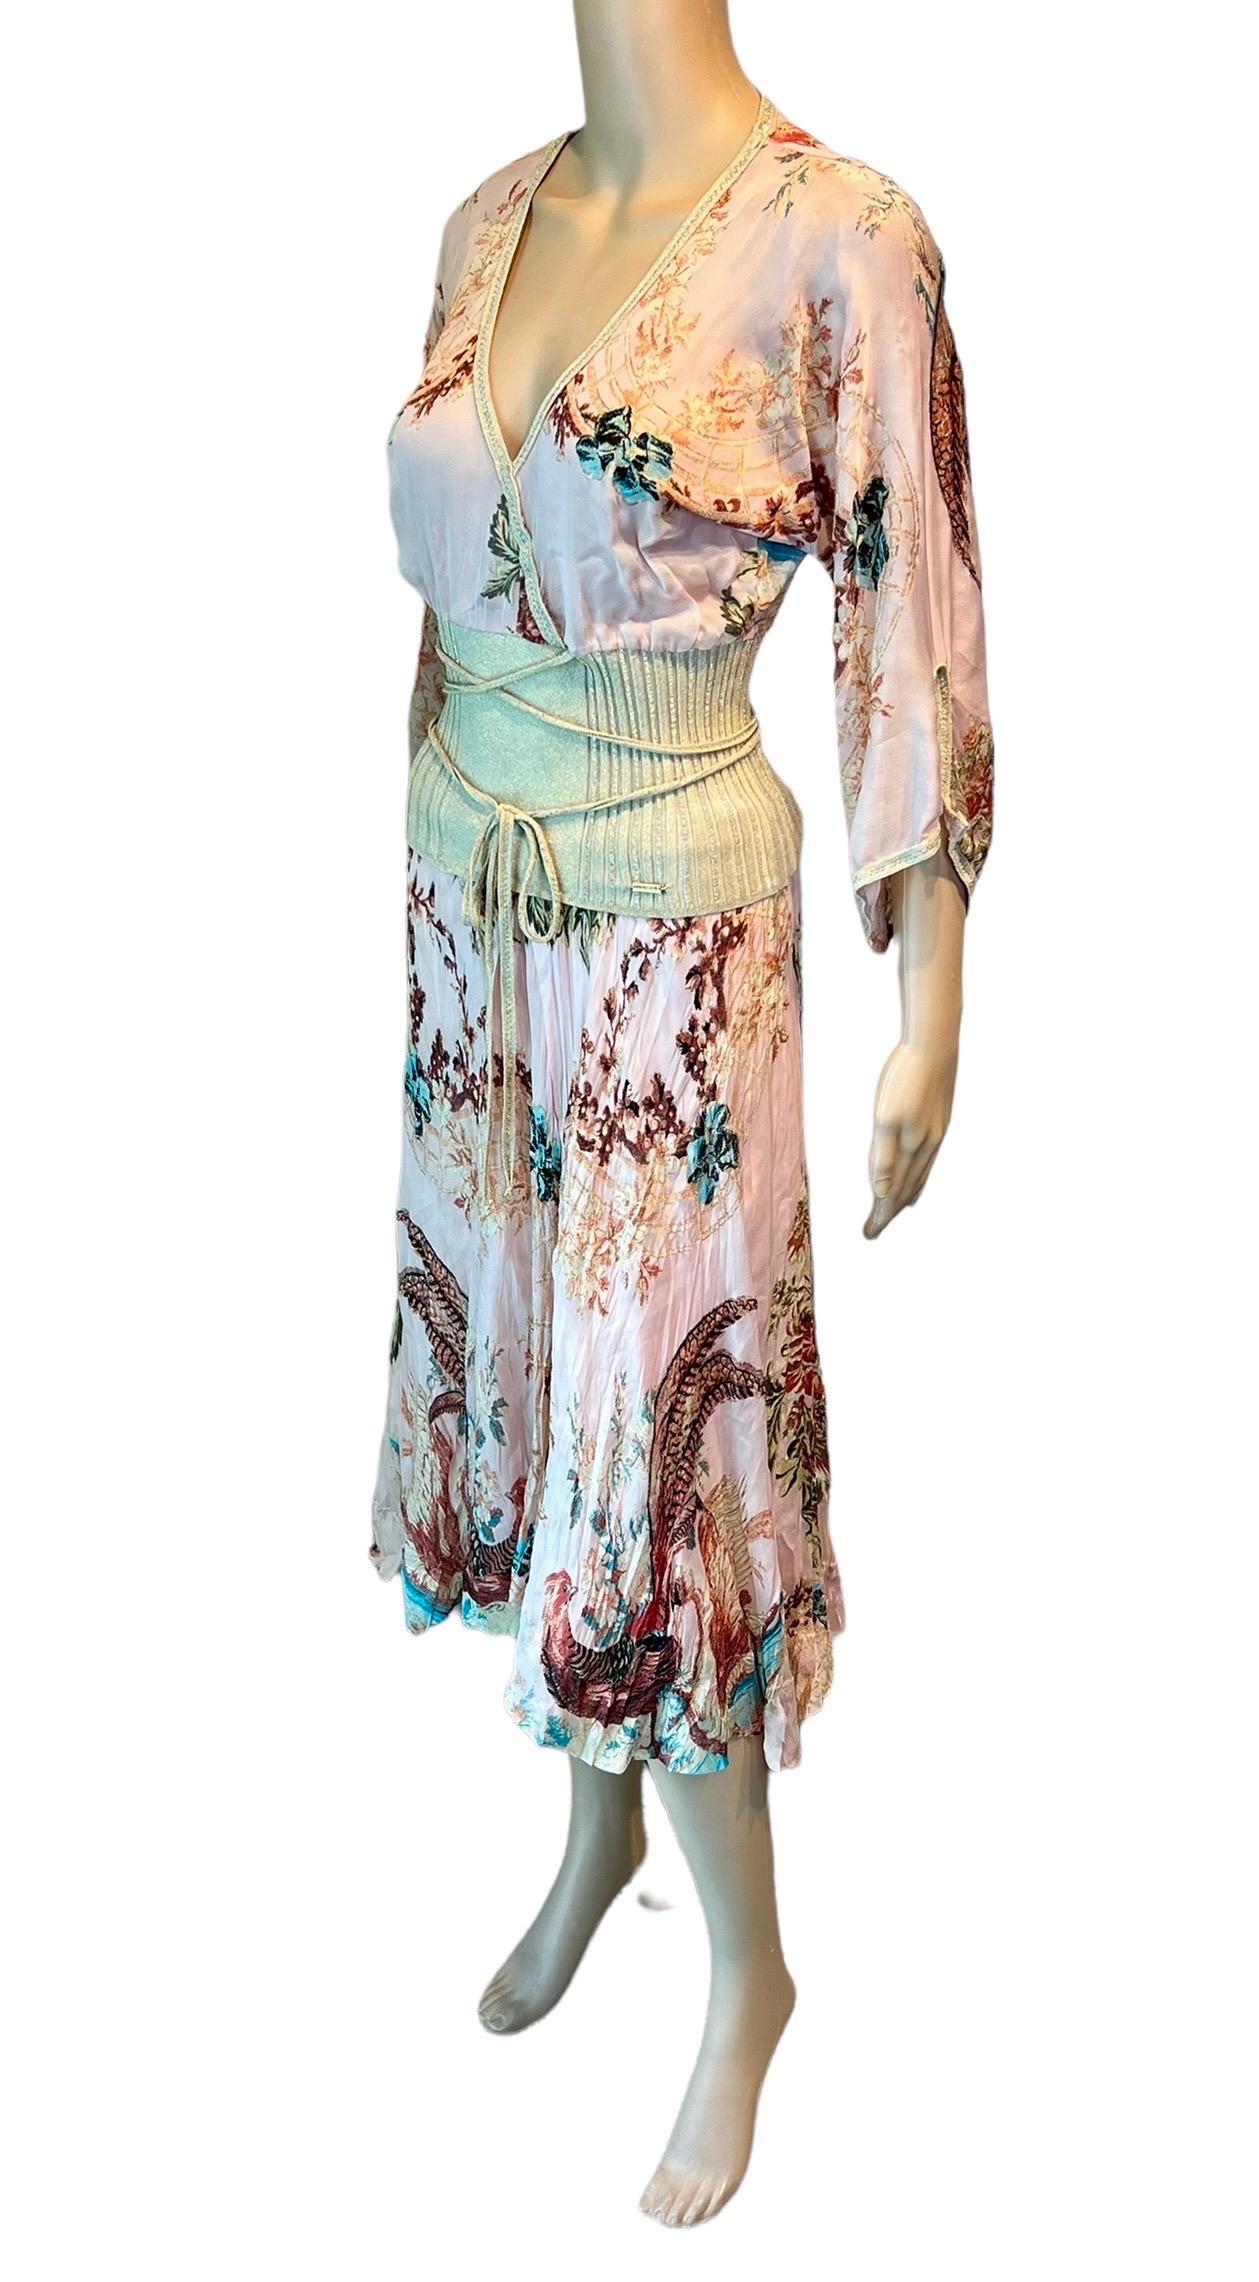 Women's Roberto Cavalli S/S 2003 Chinoiserie Print Blouse Top and Midi Skirt 2 Piece Set For Sale